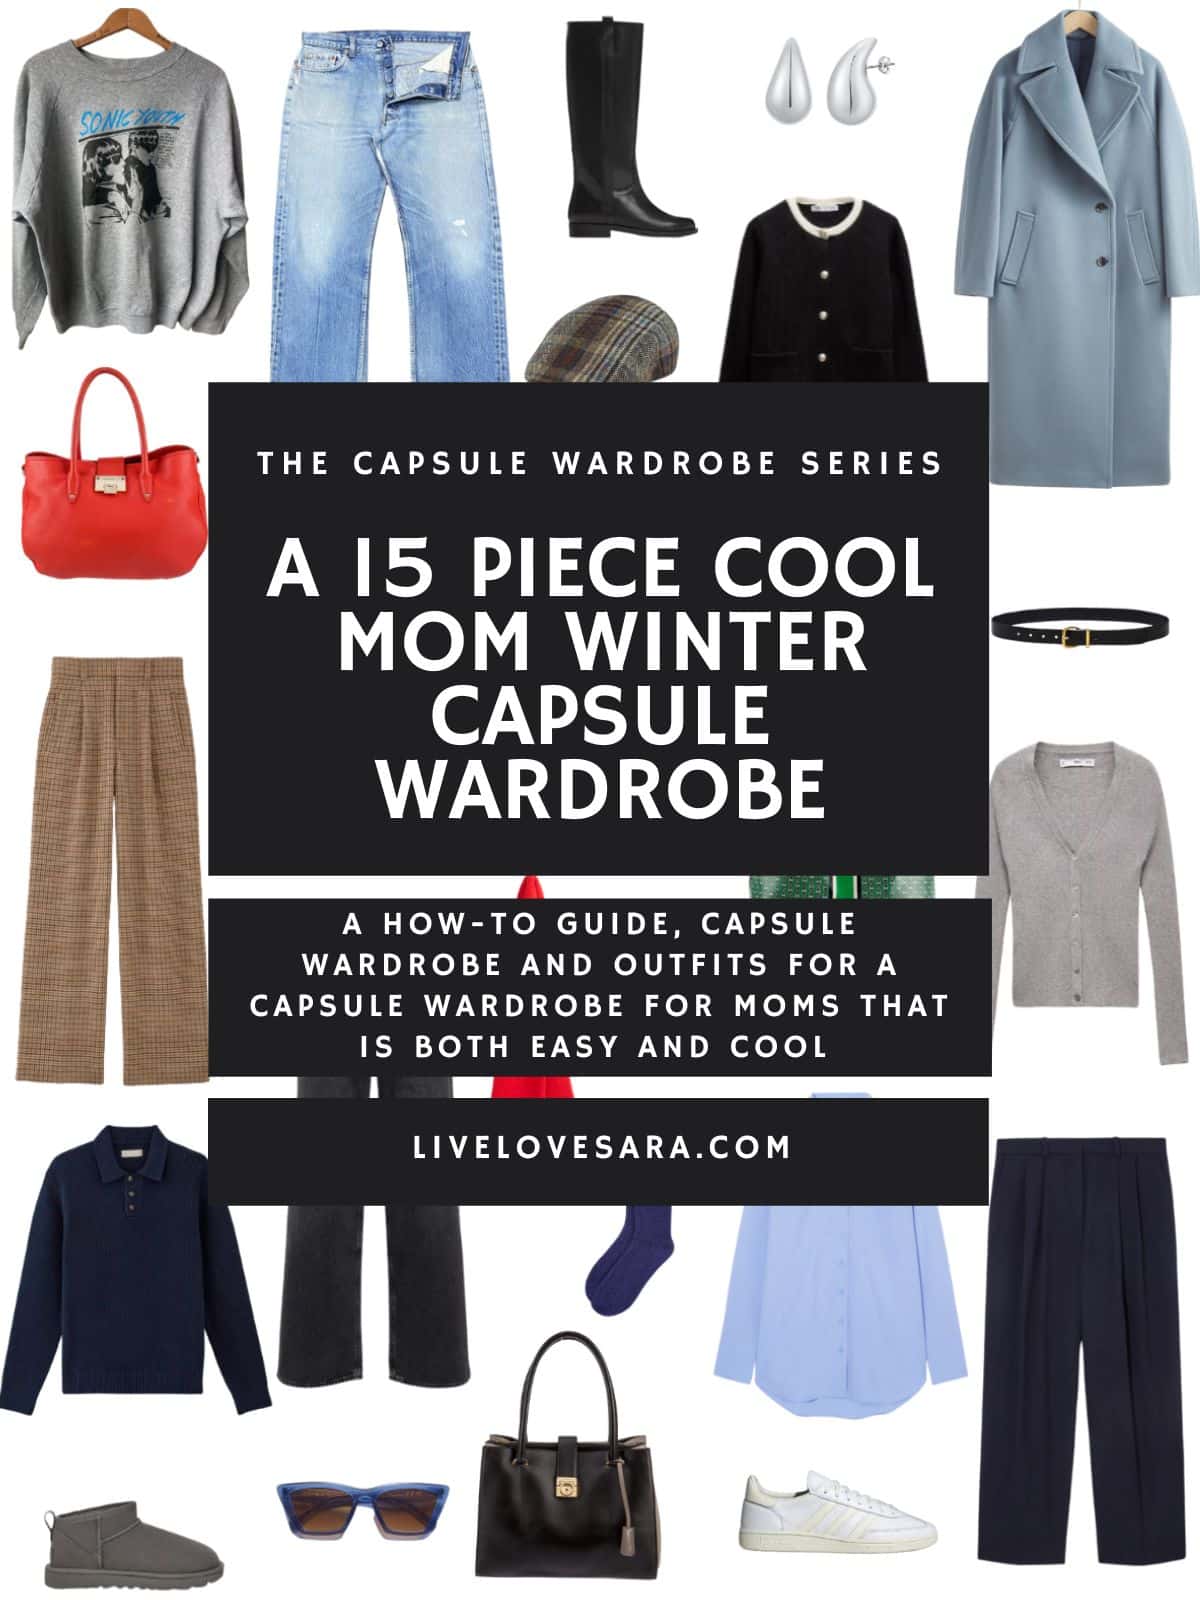 A white background with 12 clothing items plus shoes and accessories for a Mom Winter capsule wardrobe that's both stylish and easy. In the middle is a black box with white text that reads, "A 12 Piece Cool Mom Winter Capsule Wardrobe."